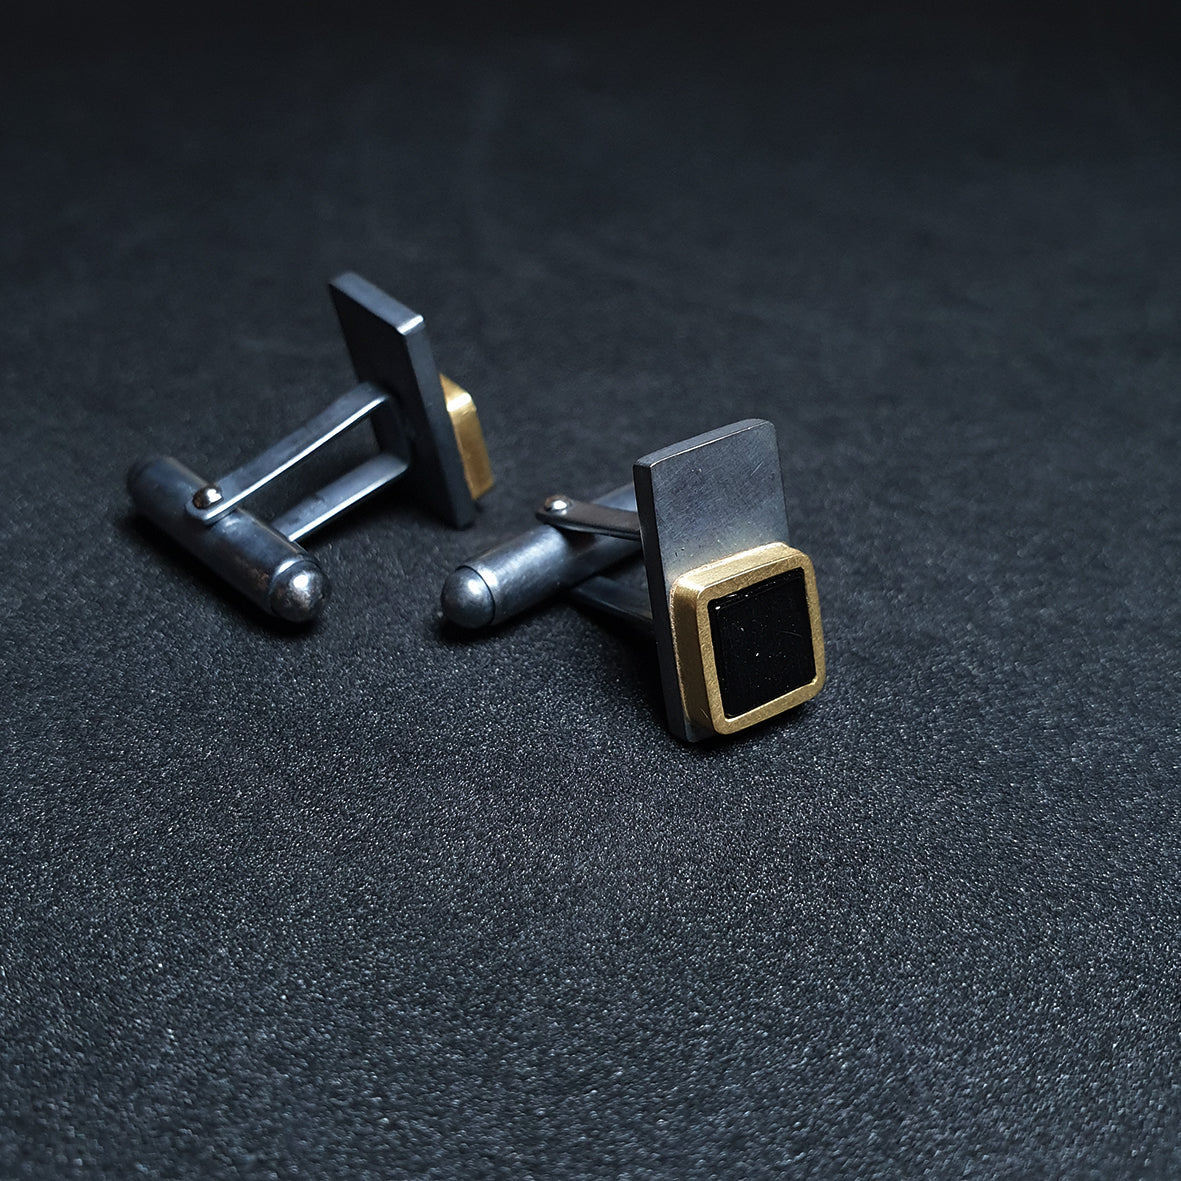 Cufflinks from the squaRes collection